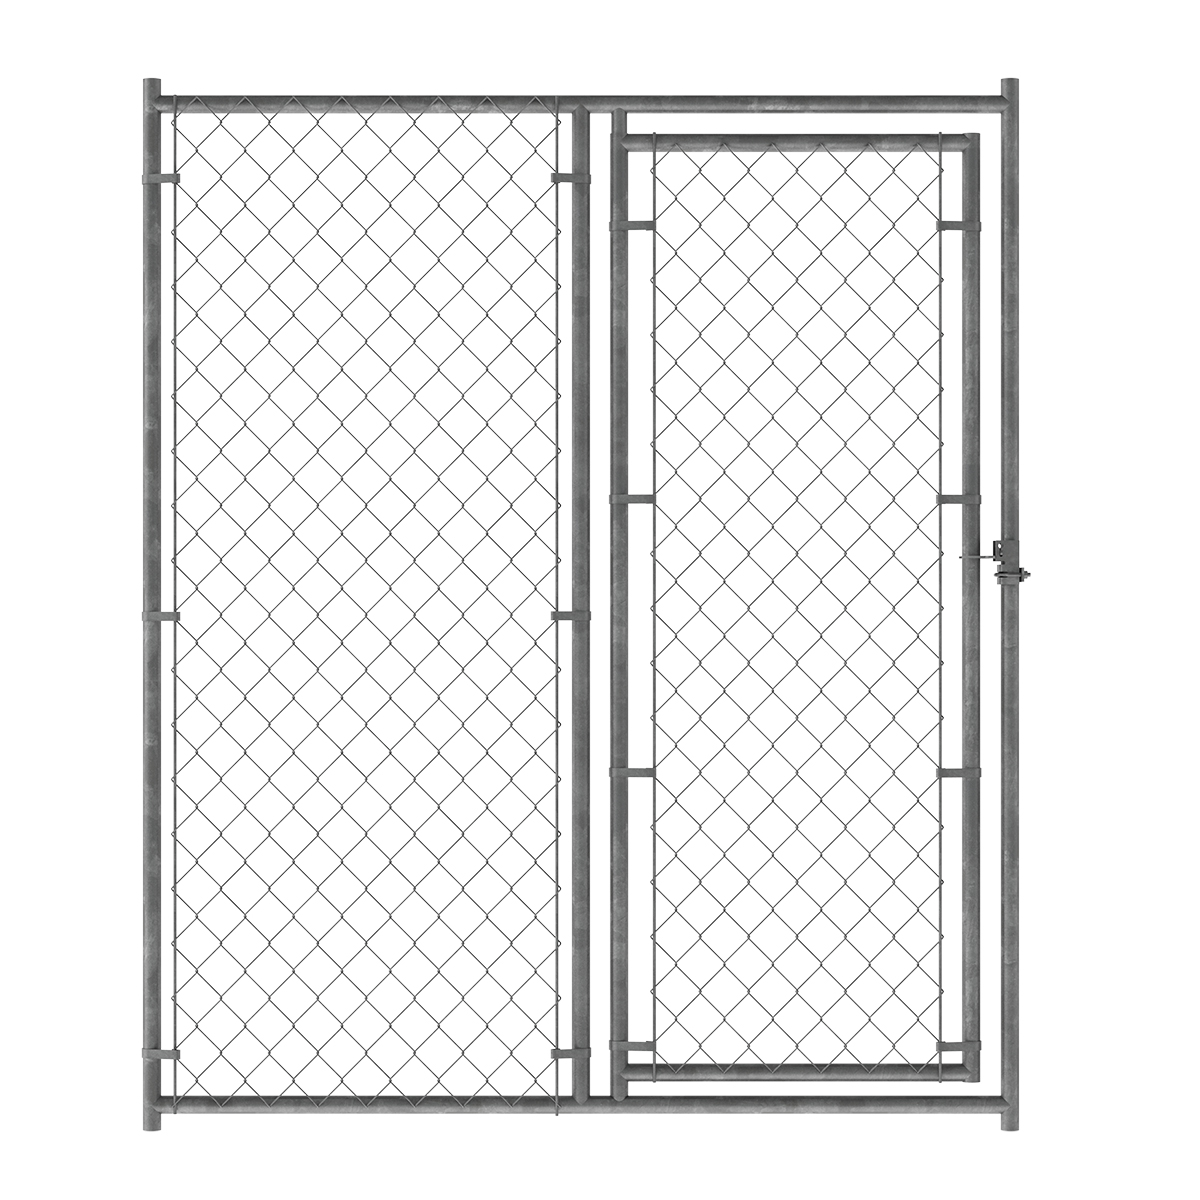 6ft H x 5ft W Chain Link Kennel Gate - Pet Kennels, Crates, Playpens ...